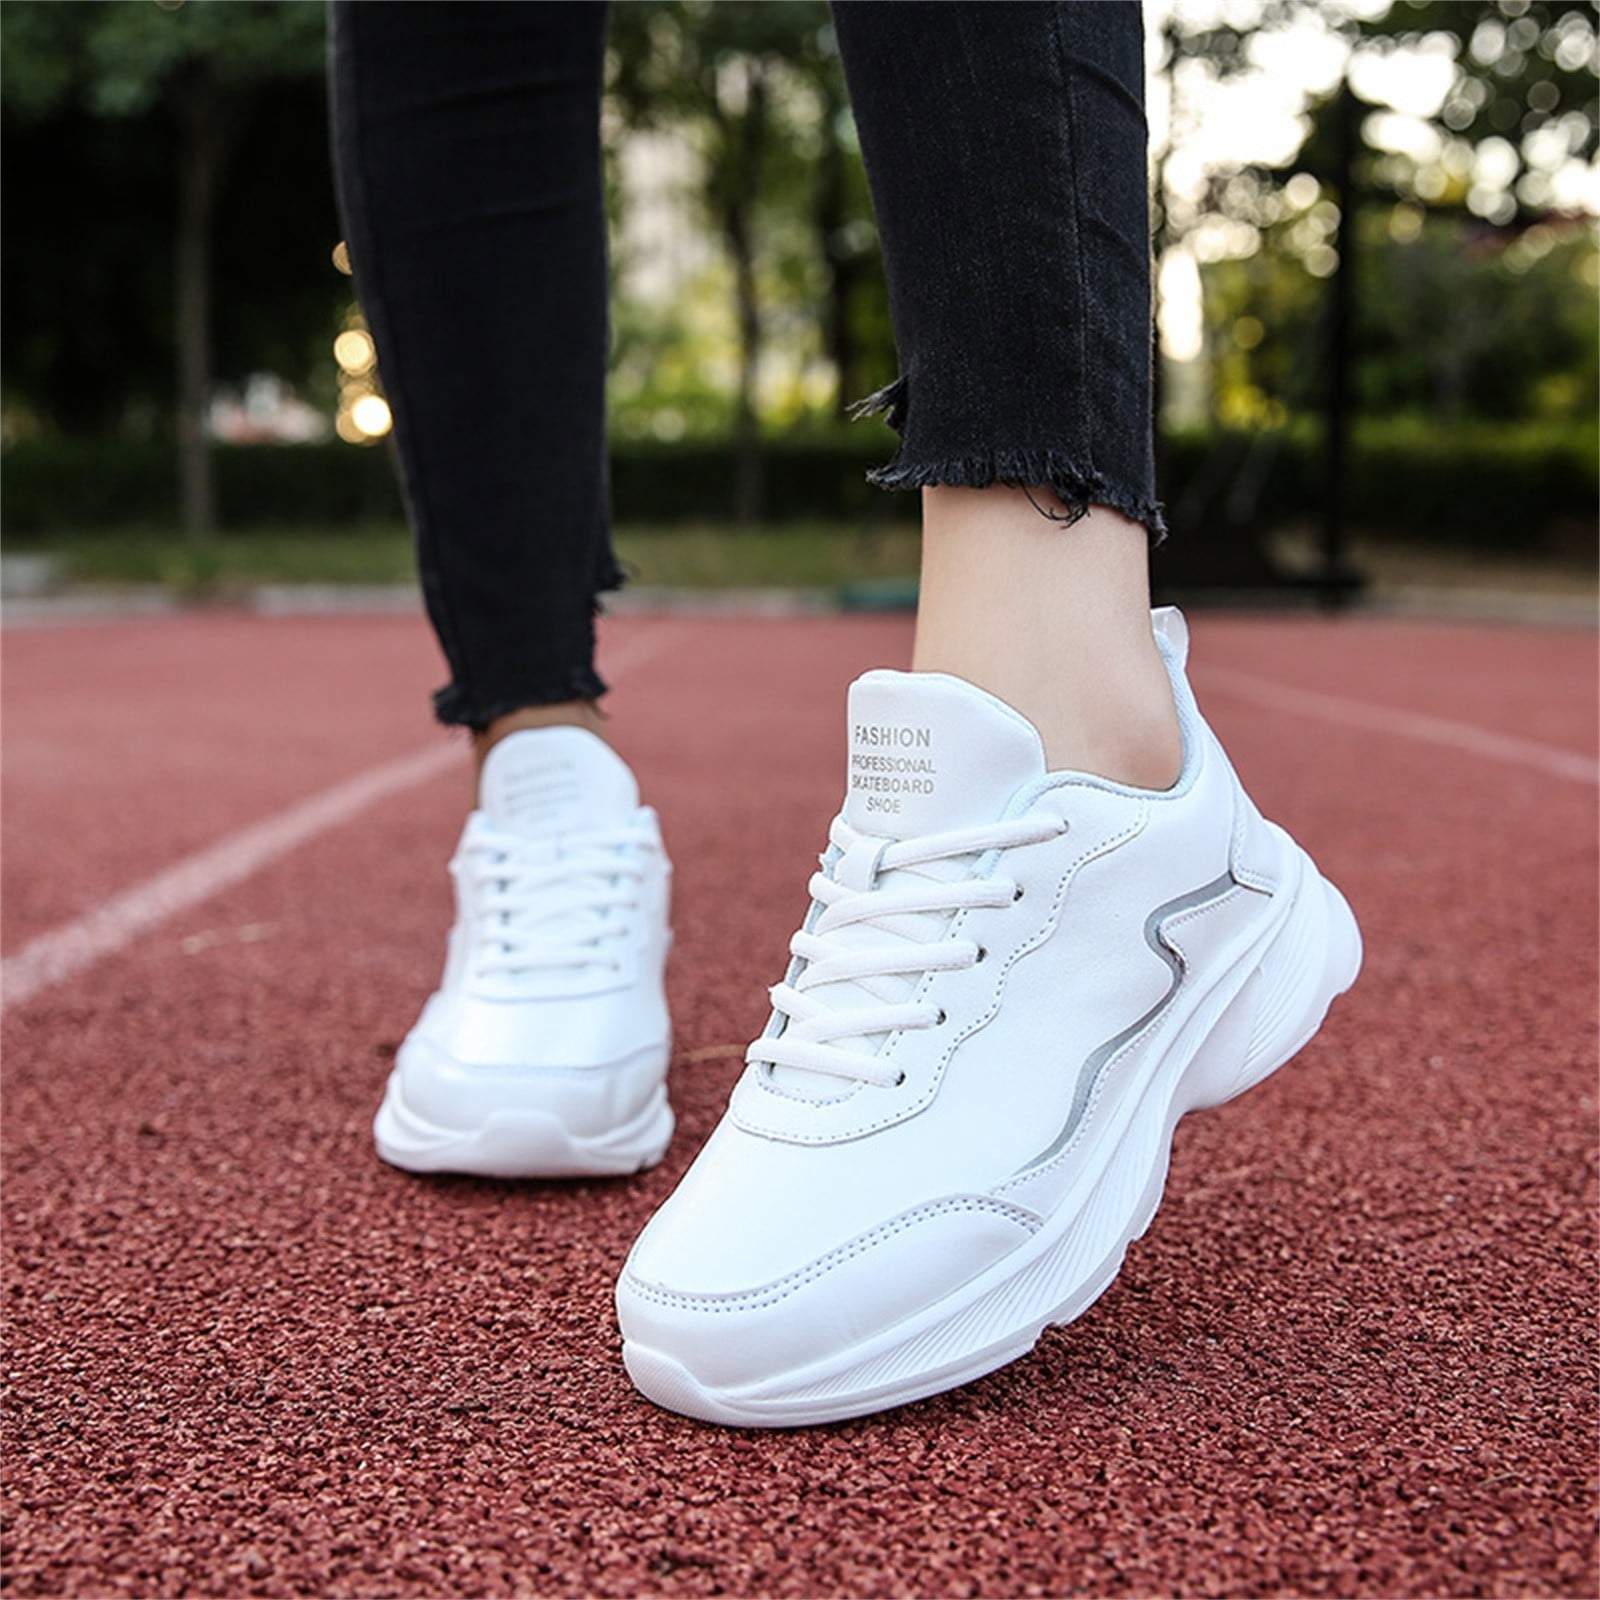 Discover 197+ lace up sneakers white best